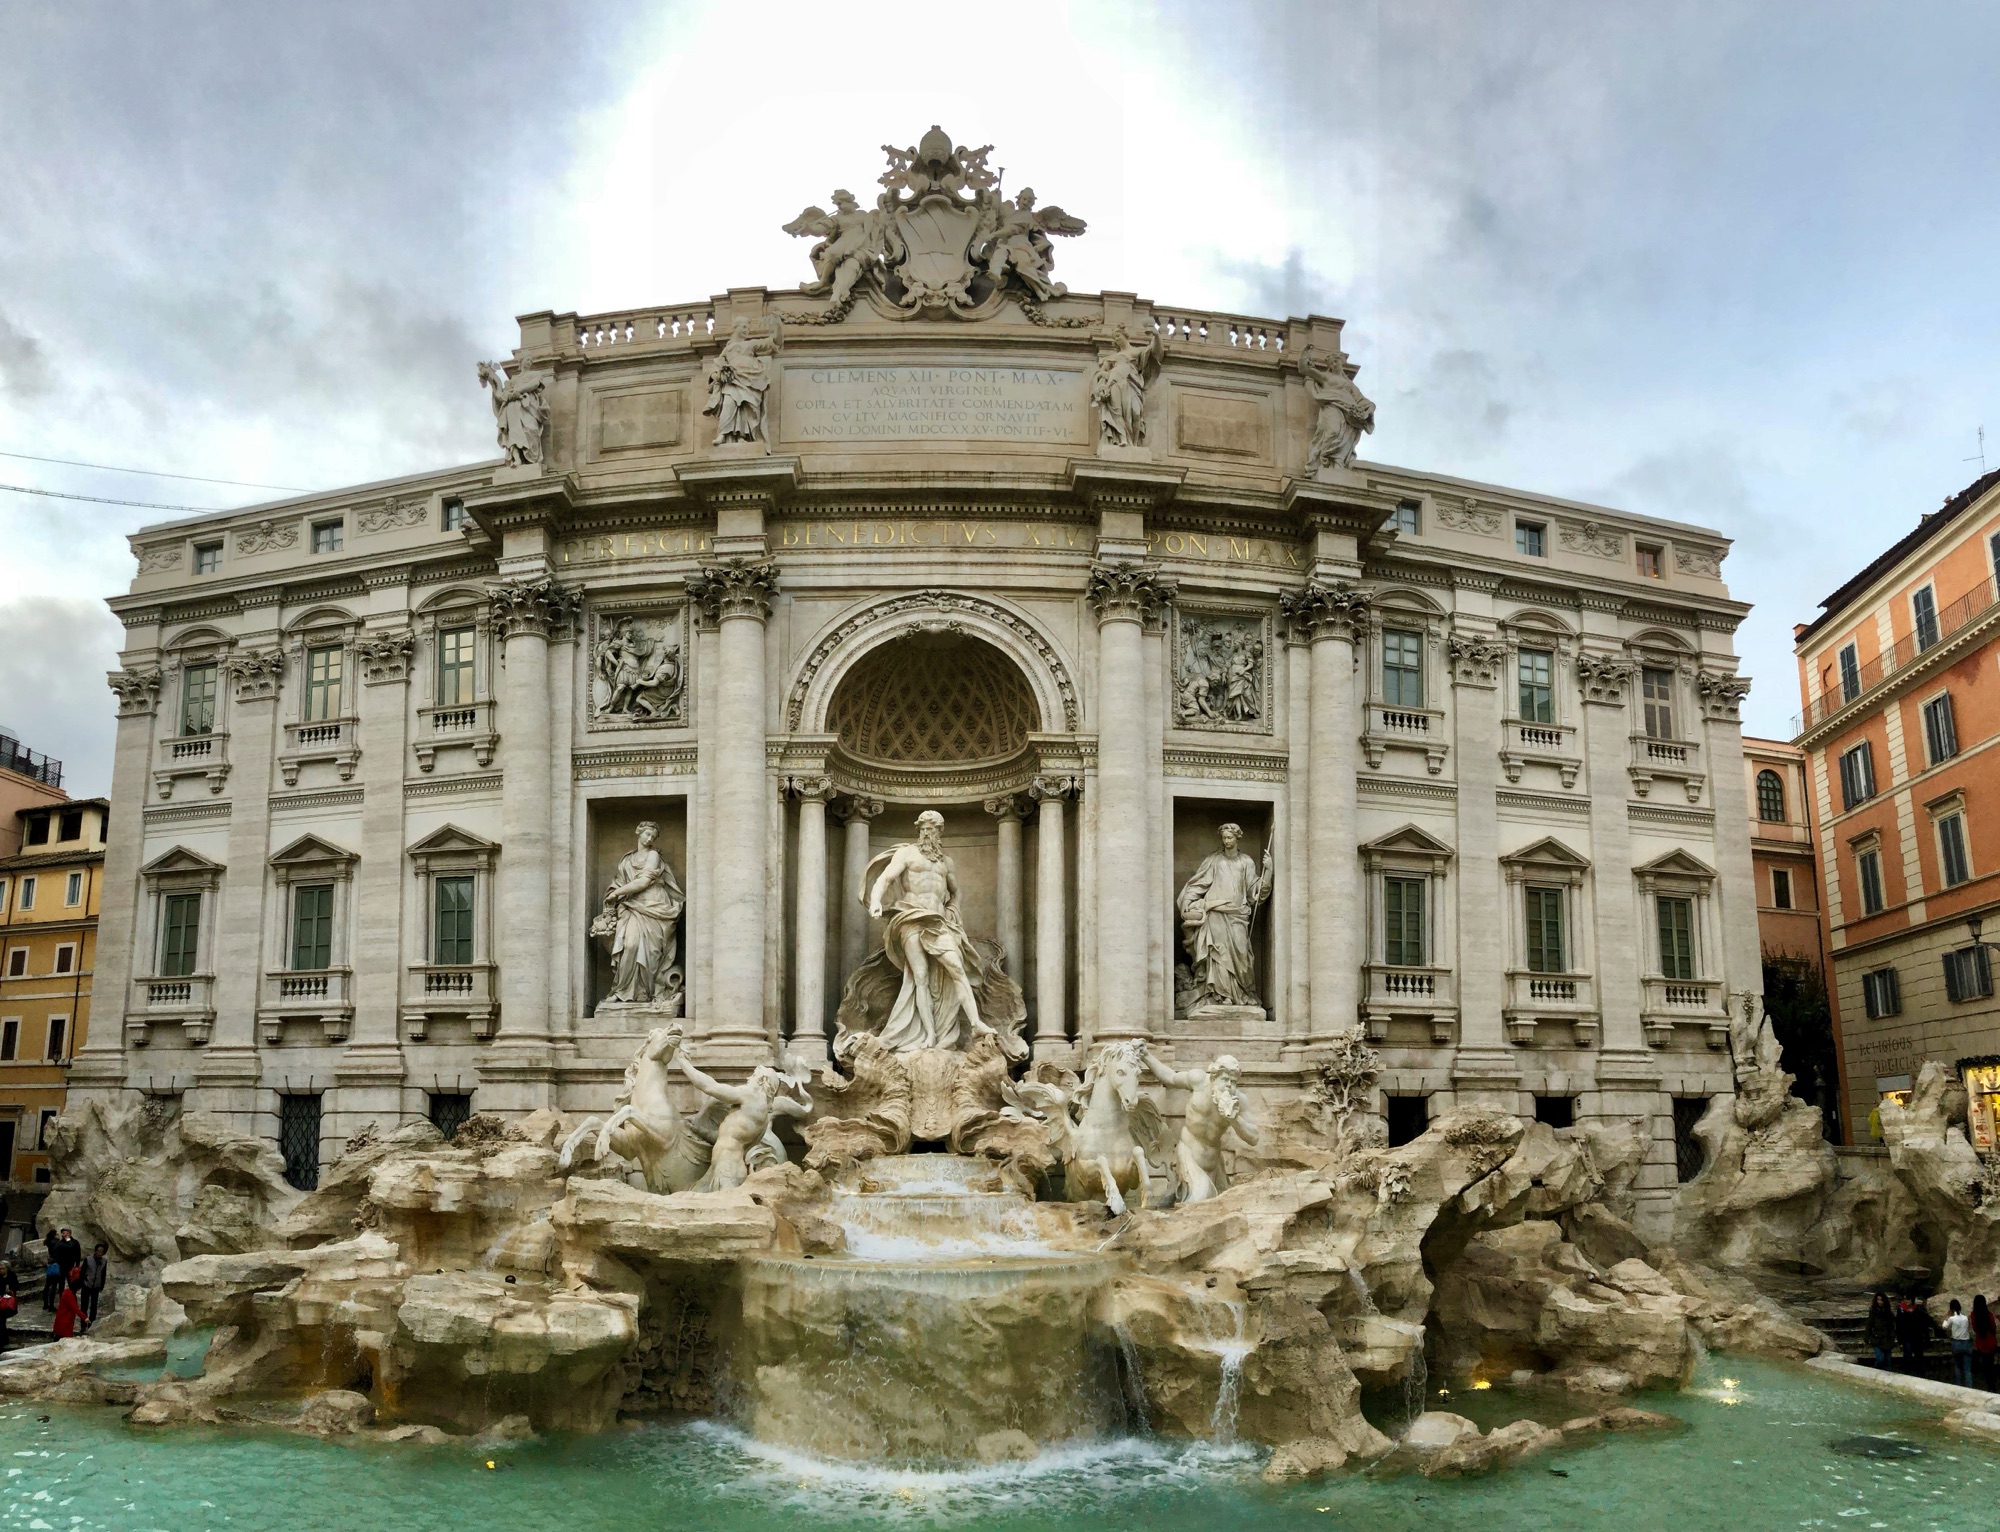 Rome’s Trevi Fountain: A Water Oasis